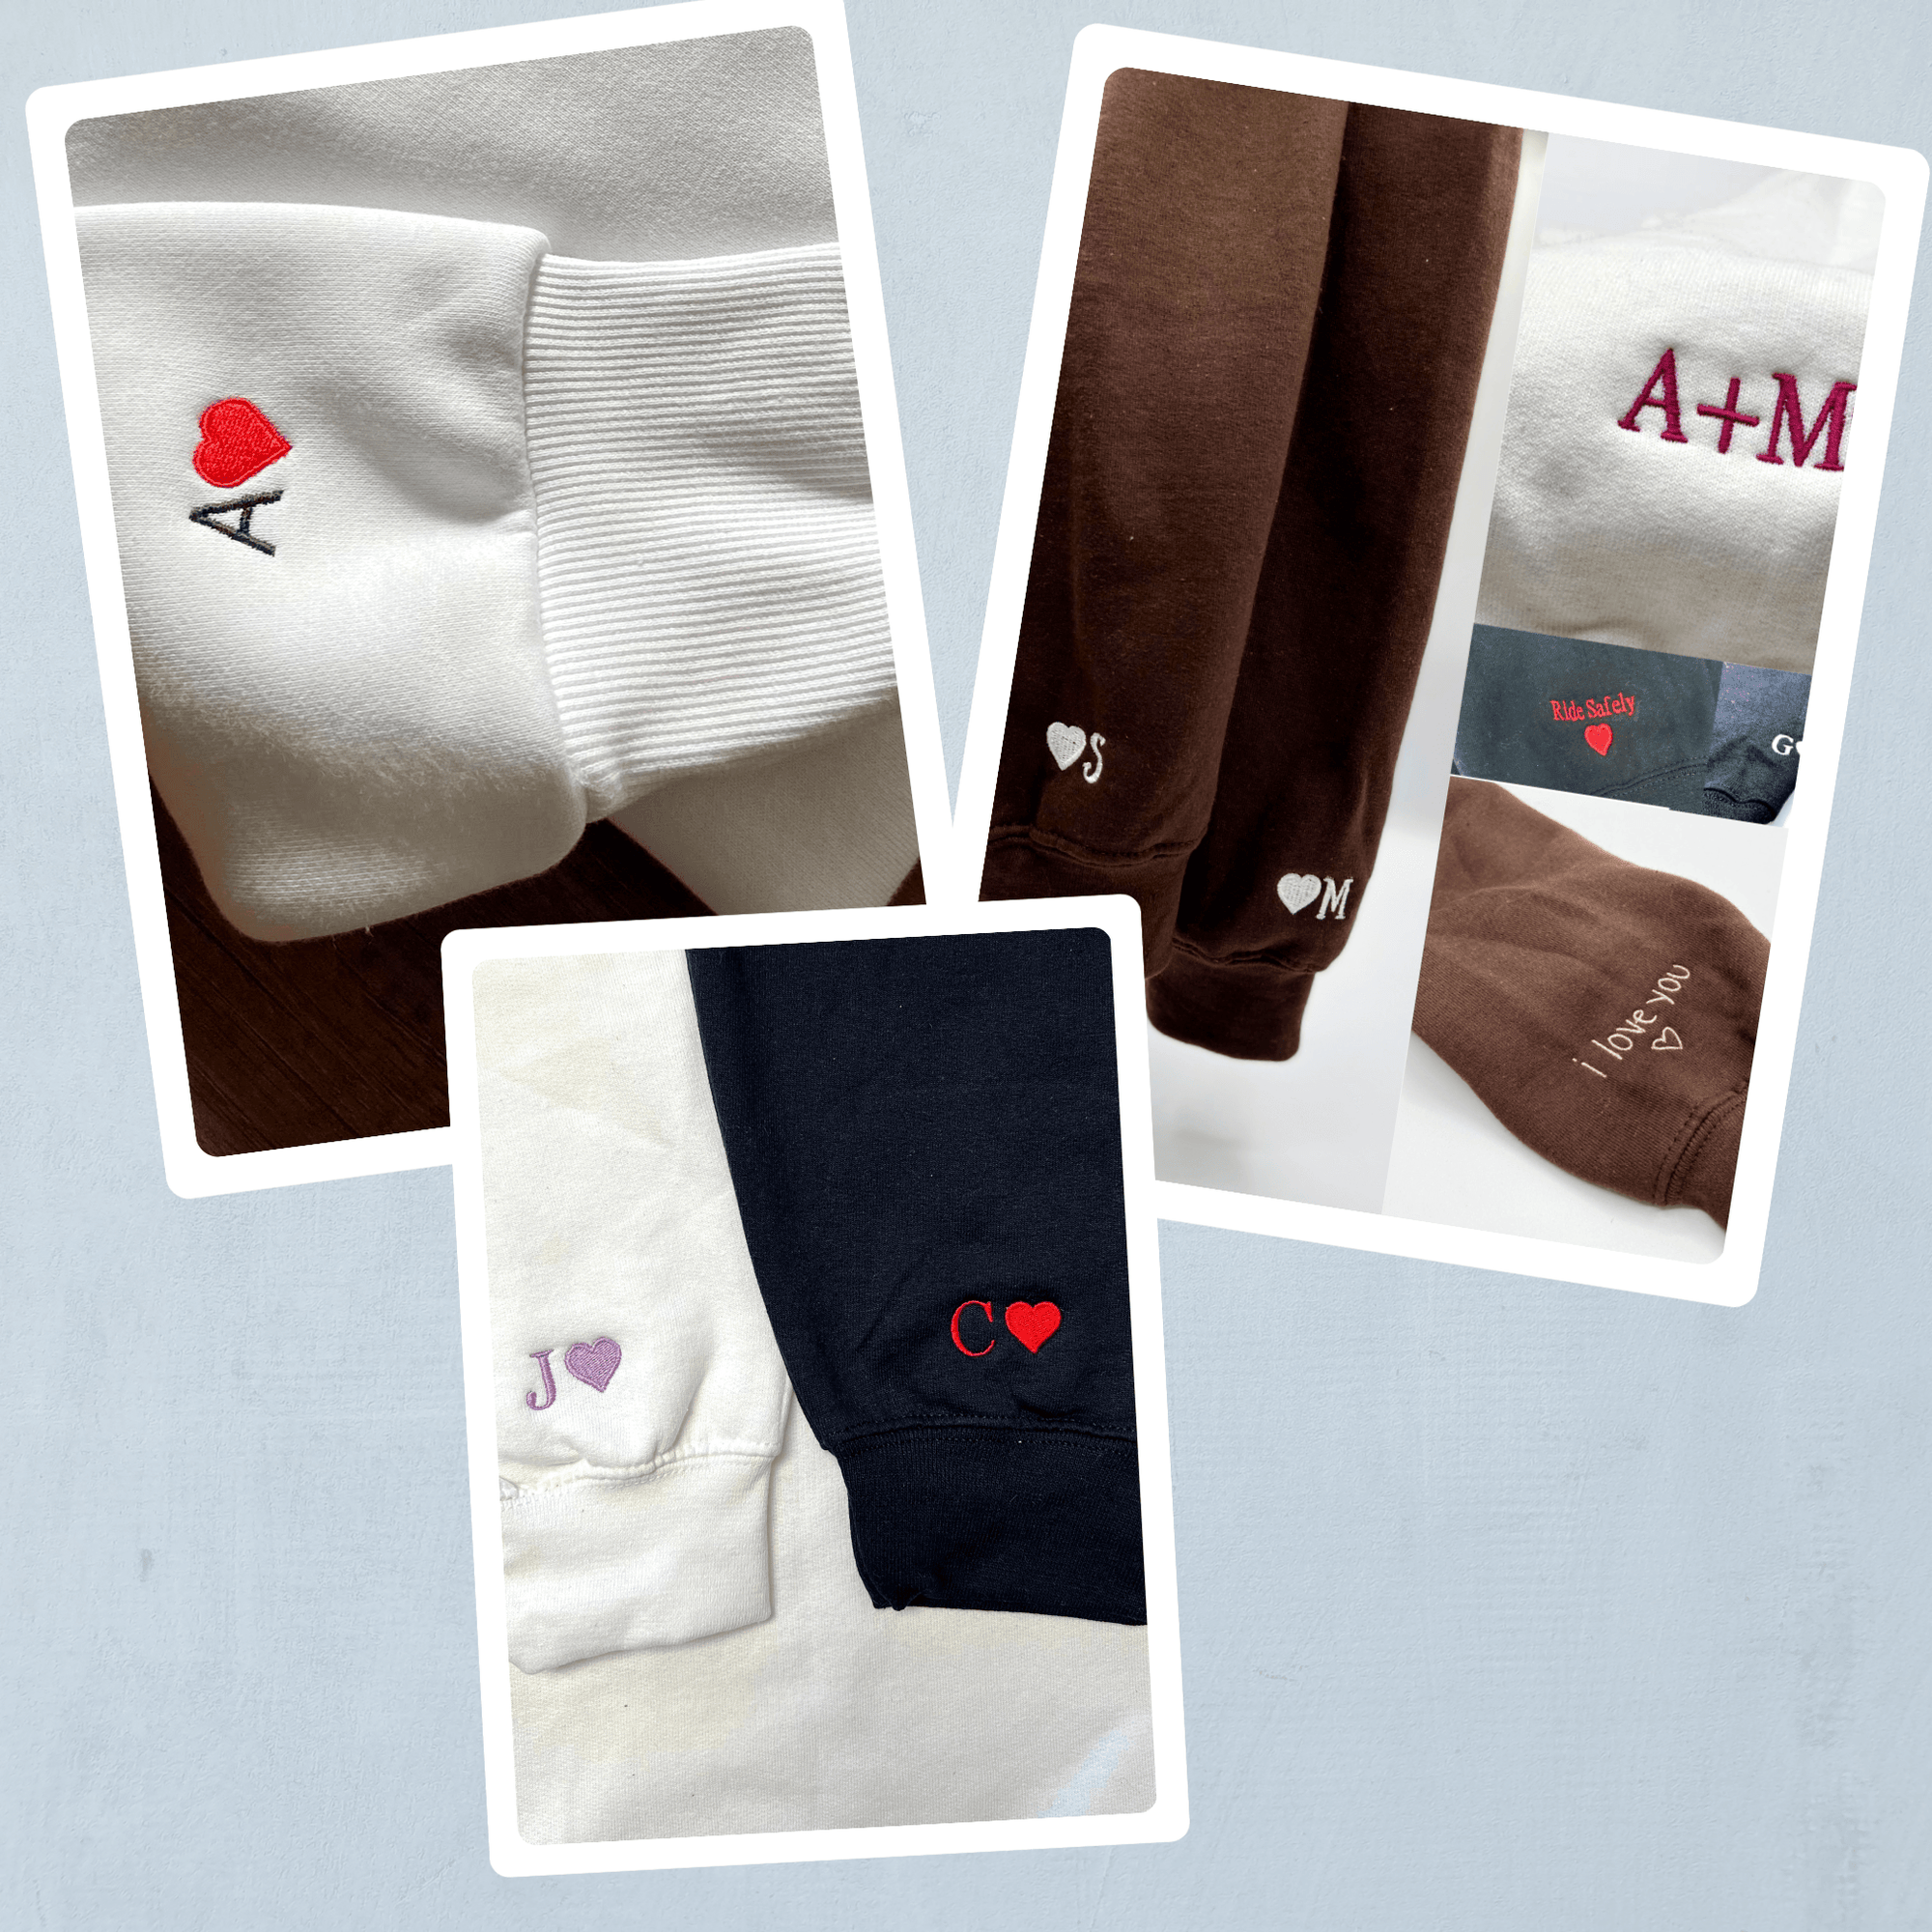 Custom Embroidered Roman Numeral Hoodies For Couples, Roman Numeral Date Hoodie, Cute Cartoon Ducks Couples Embroidered Hoodie